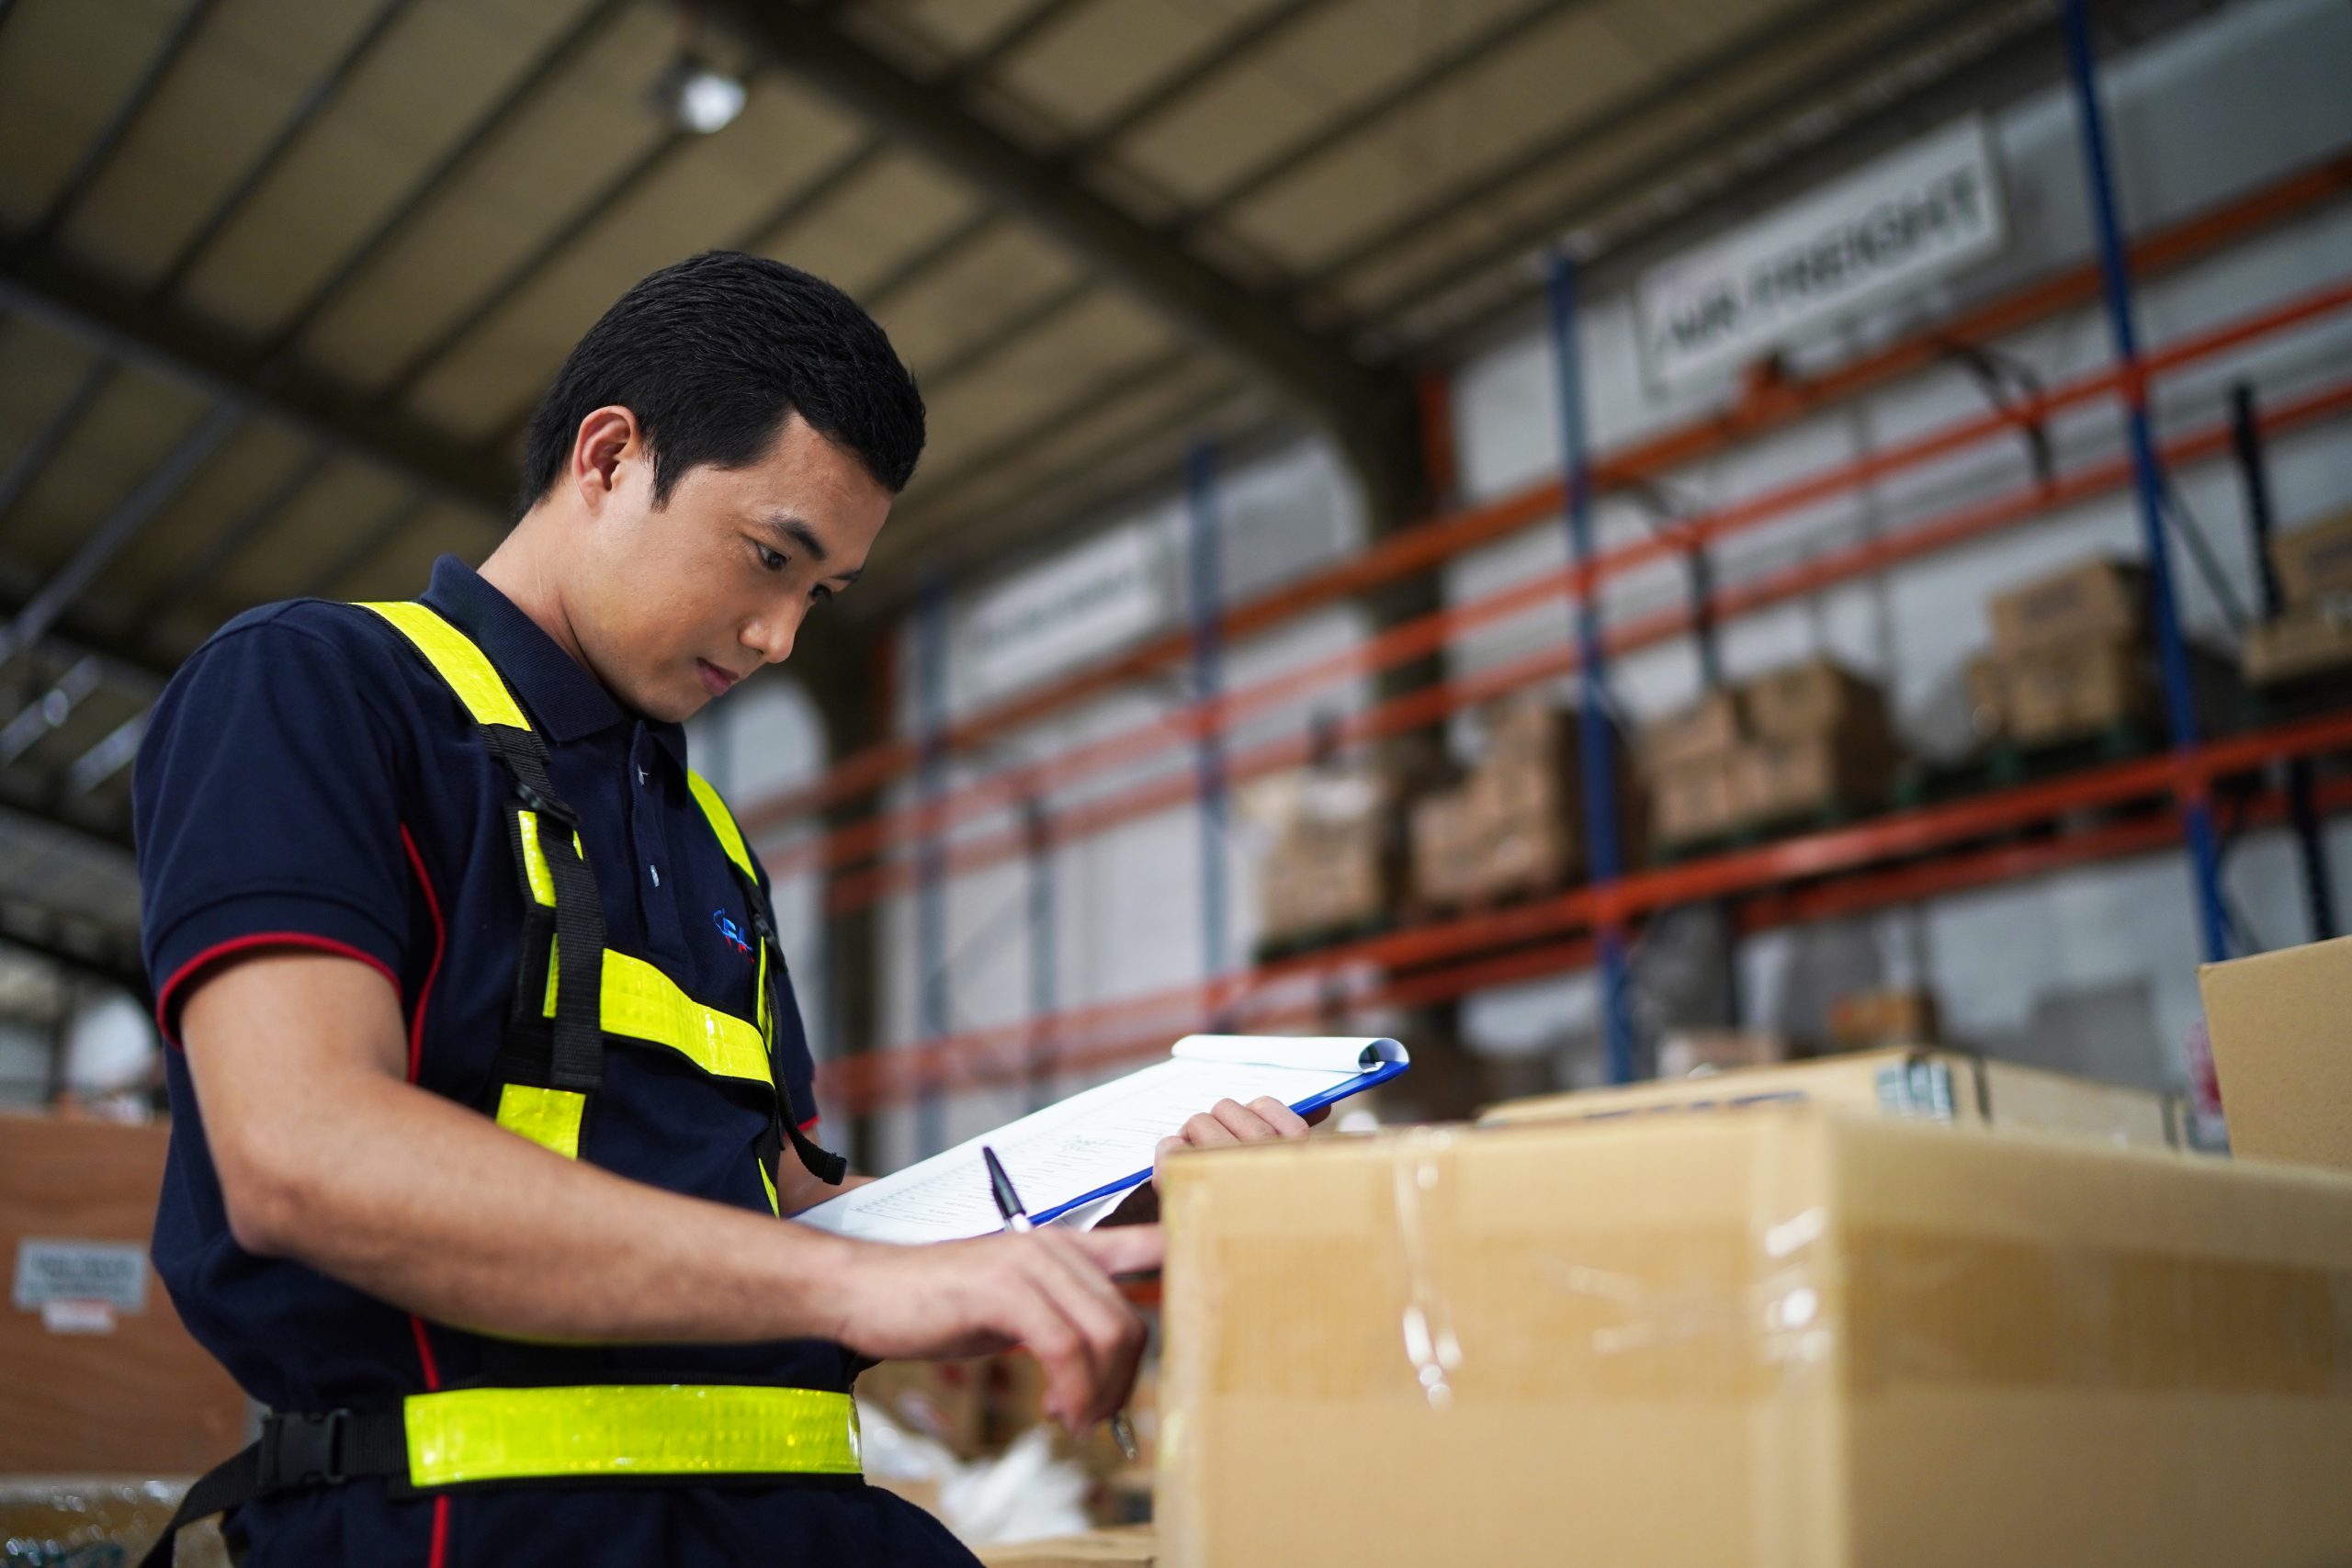 cross docking and freight forwarding